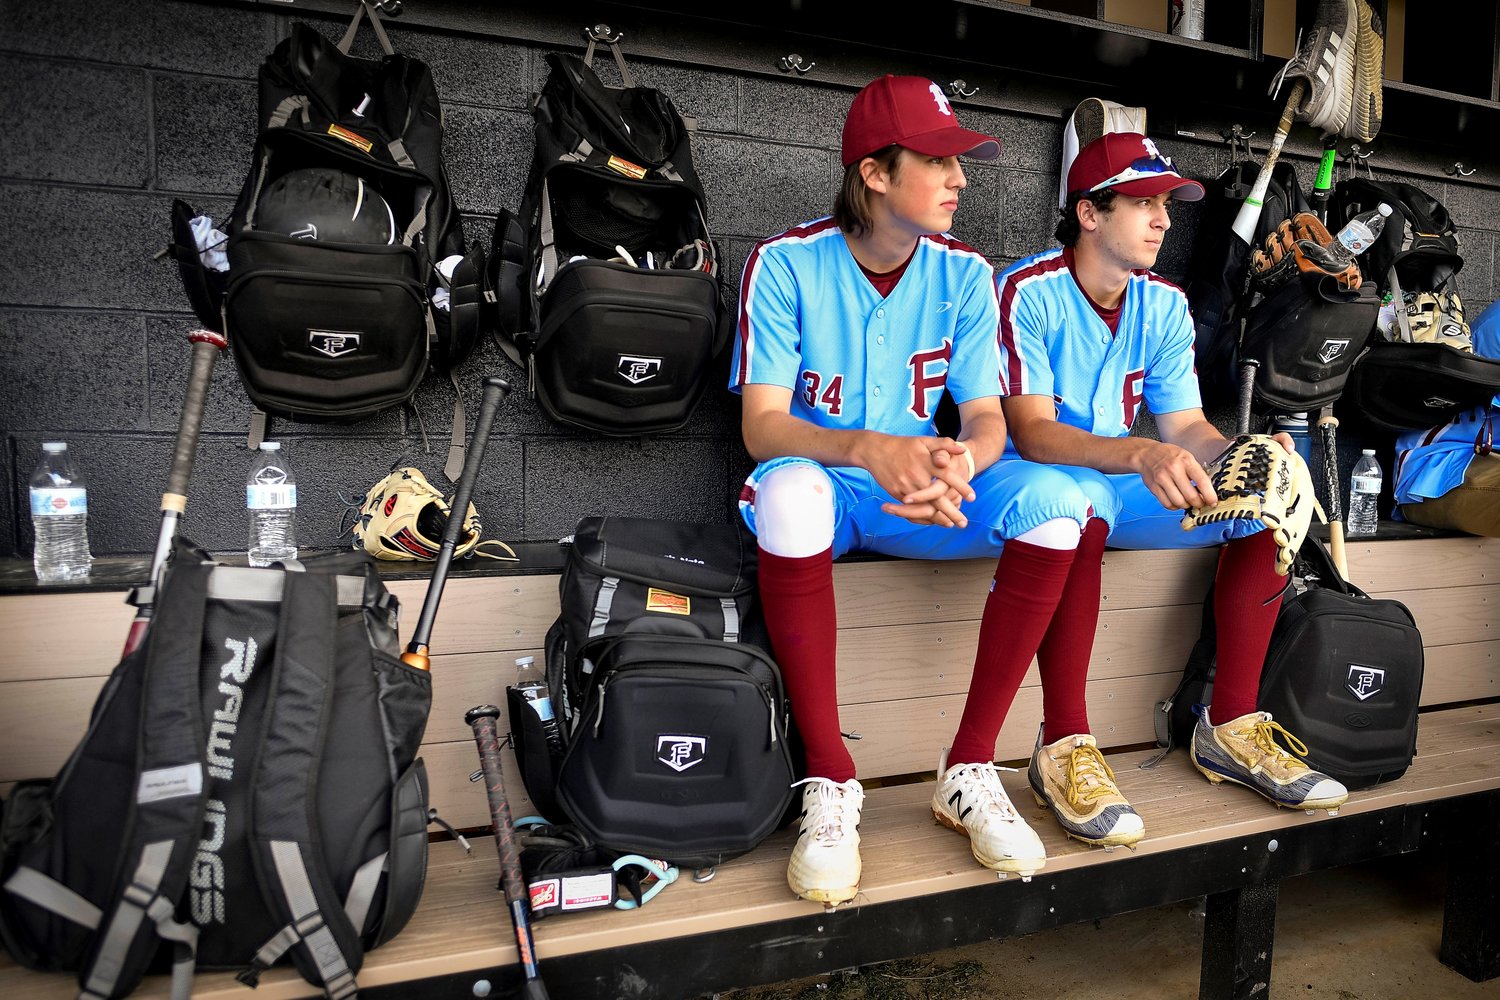 Faith starting pitcher Brody Harp sits next to Nathan Spicer before the start of the game.